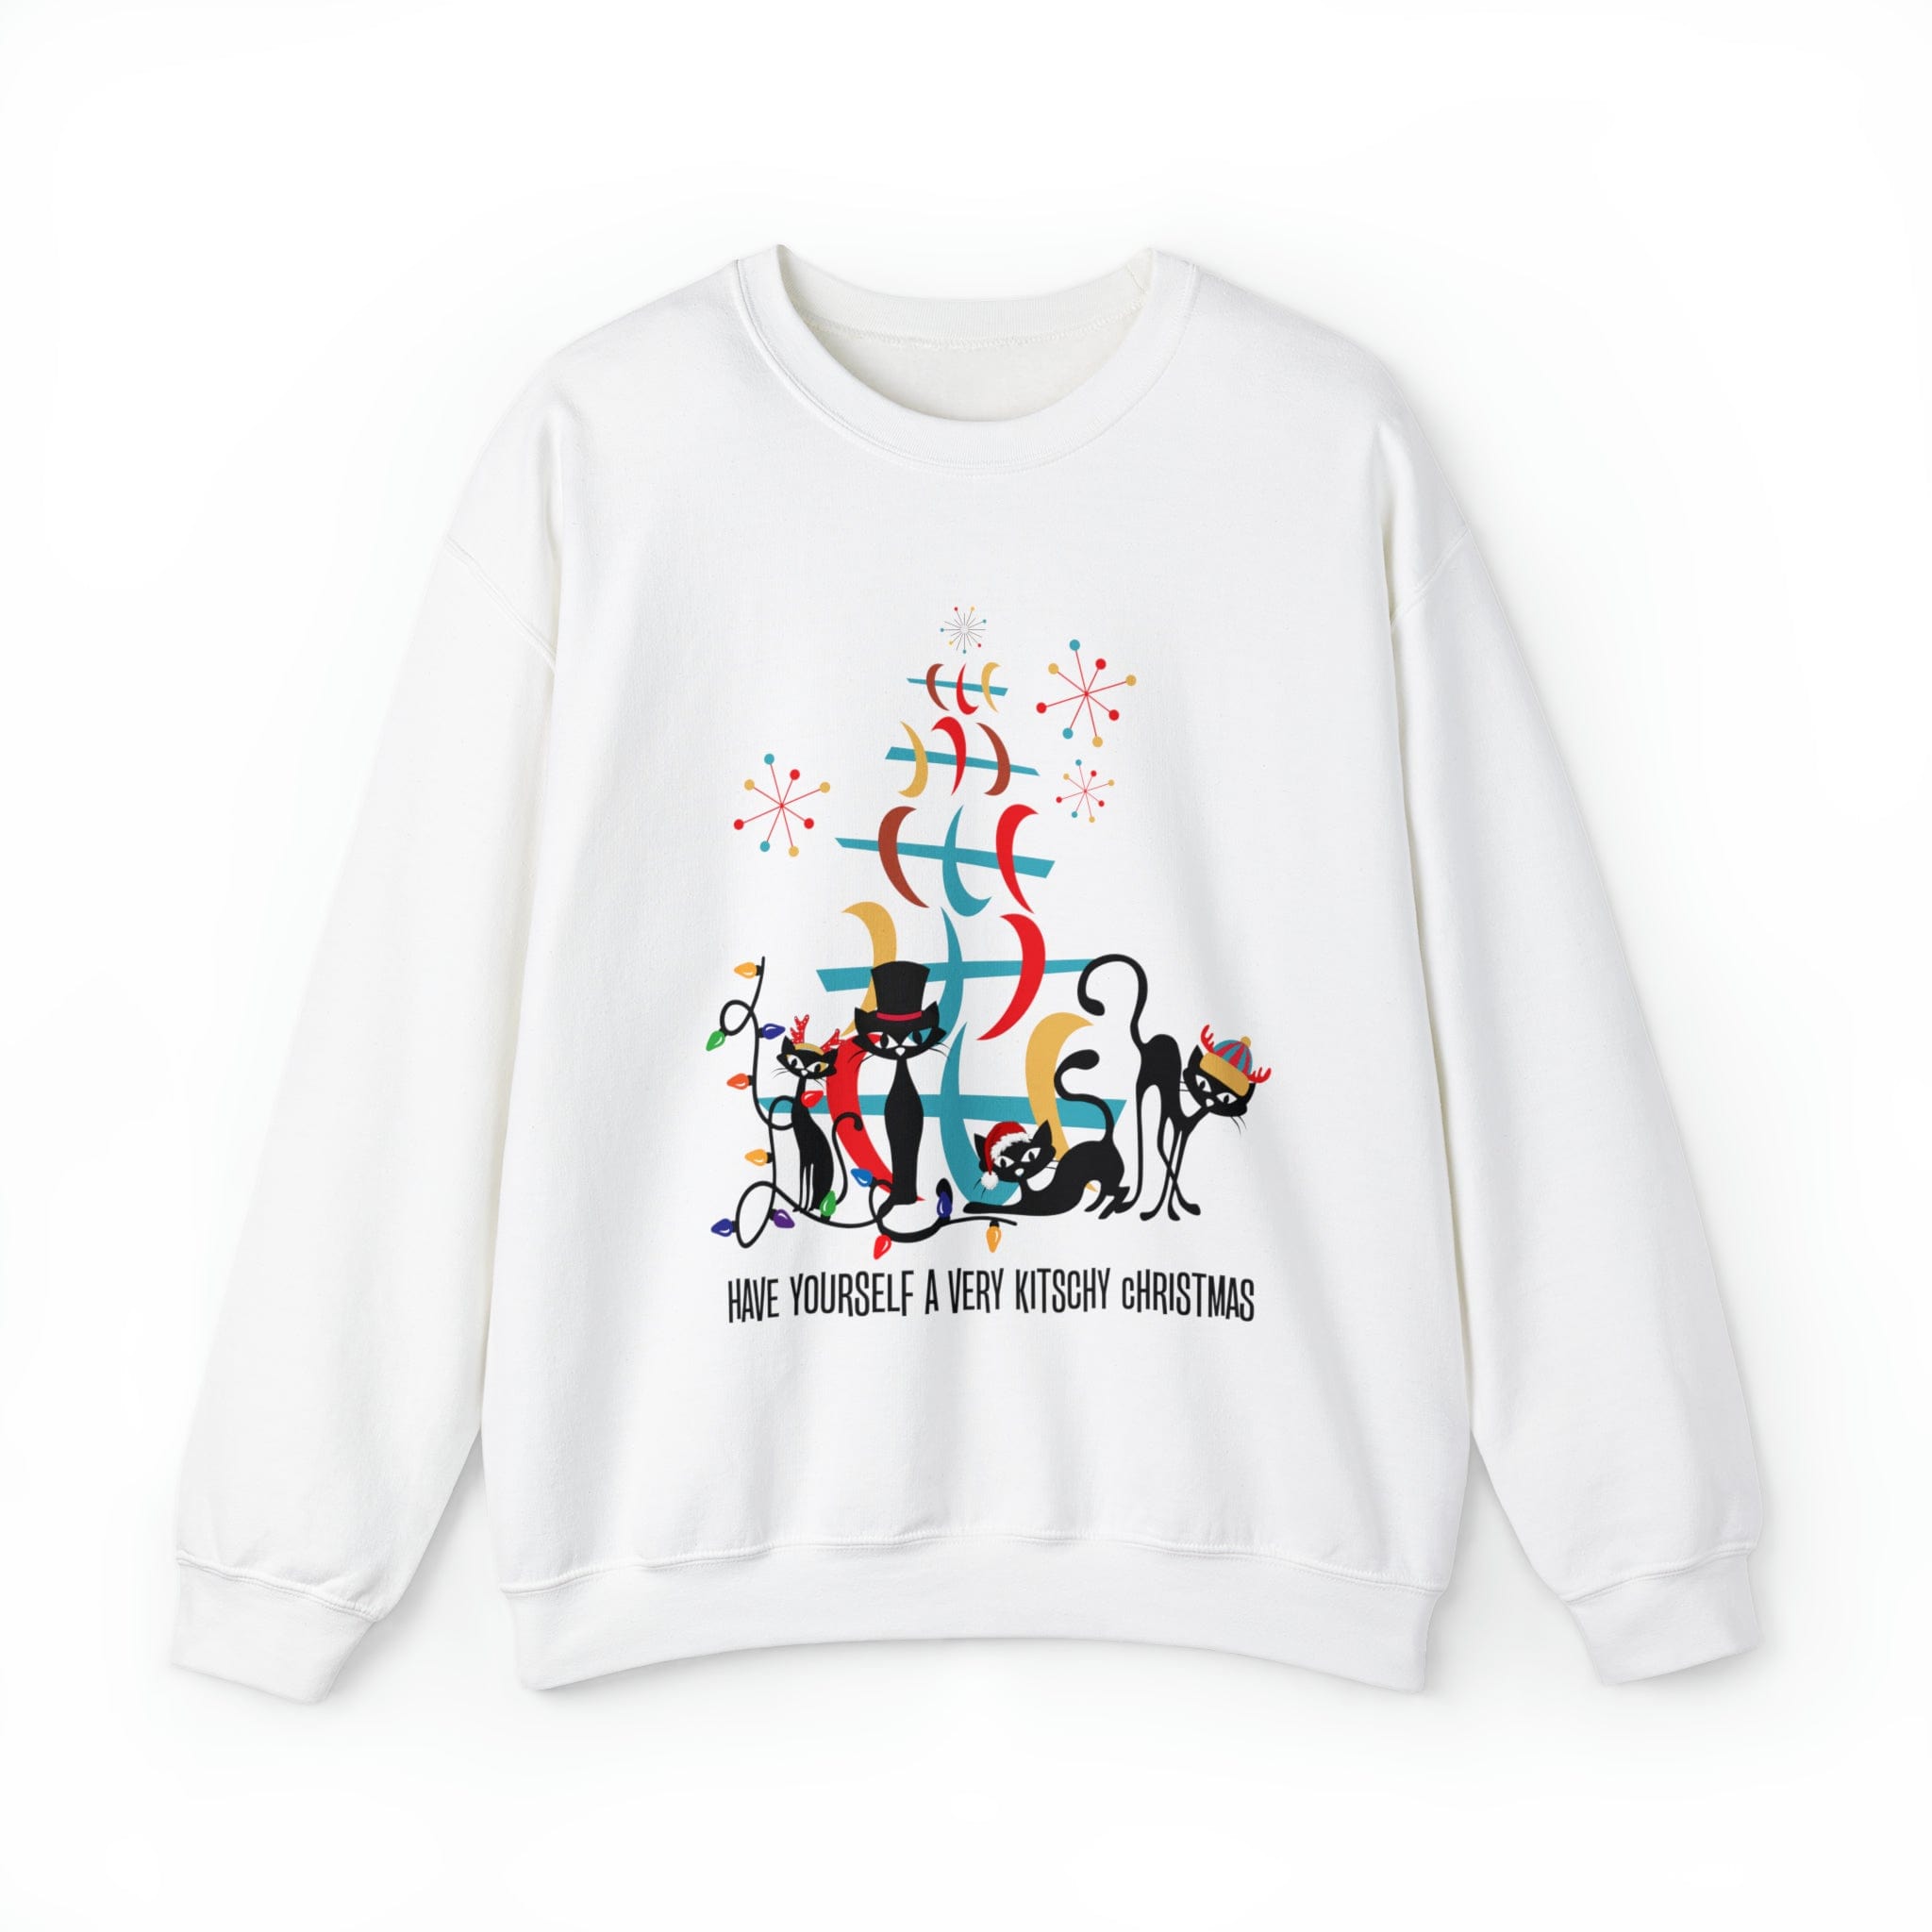 Atomic Cat Christmas Sweater, Have Yourself A Very Kitschy Christmas Cozy Loose Fit, Sweatshirt Sweatshirt 2XL / White